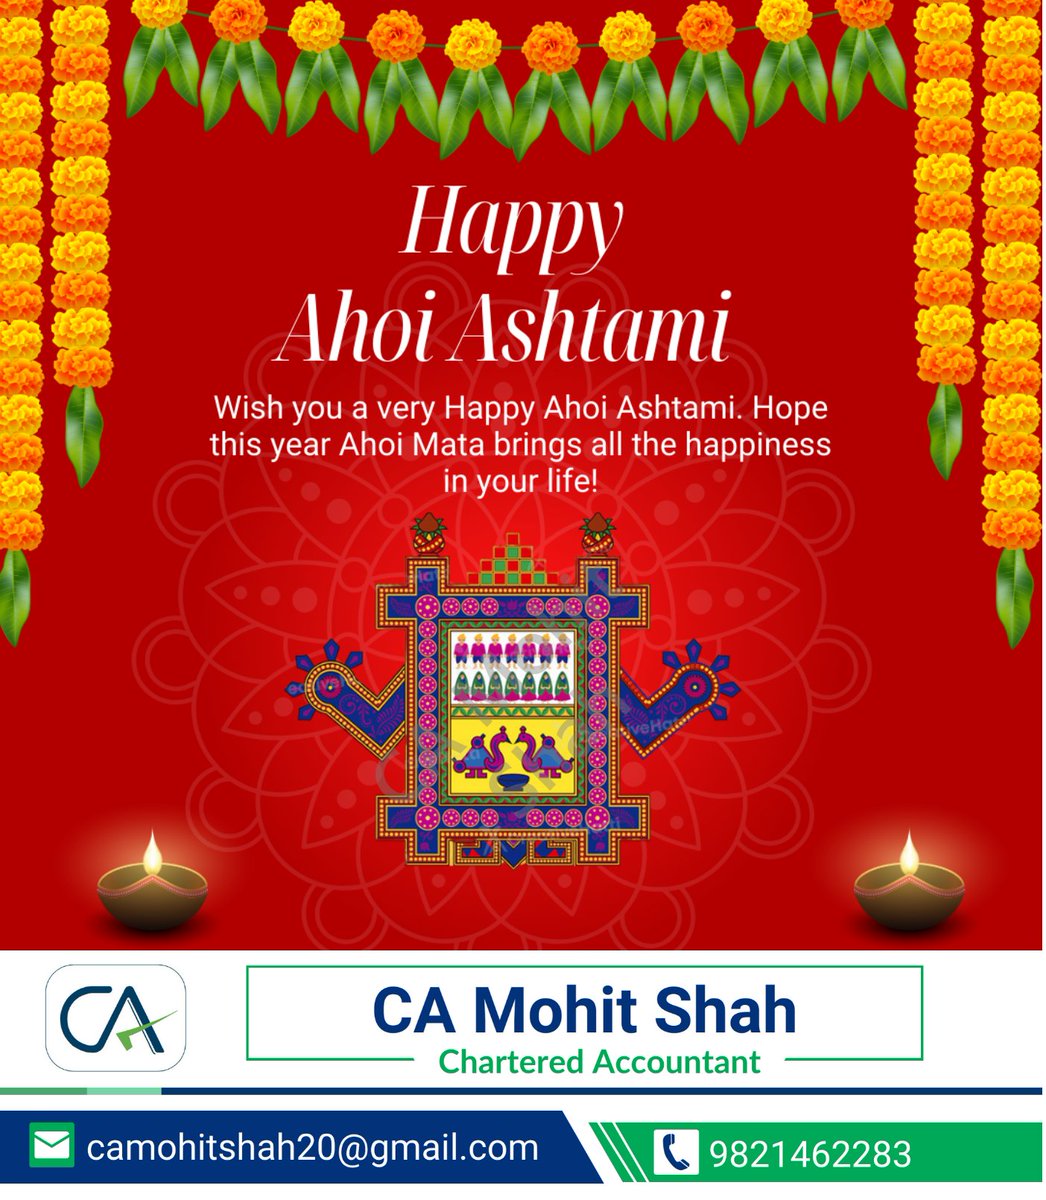 Happy Ahoi Ashtami to all the mothers and families out there! May your prayers be answered and your families be blessed with health and happiness. 🌟🙏

#AhoiAshtami #AhoiAshtami2023 #MotherhoodCelebration #AhoiMataPuja #FastingAndPrayers #AhoiAshtamiVrat #FamilyTraditions